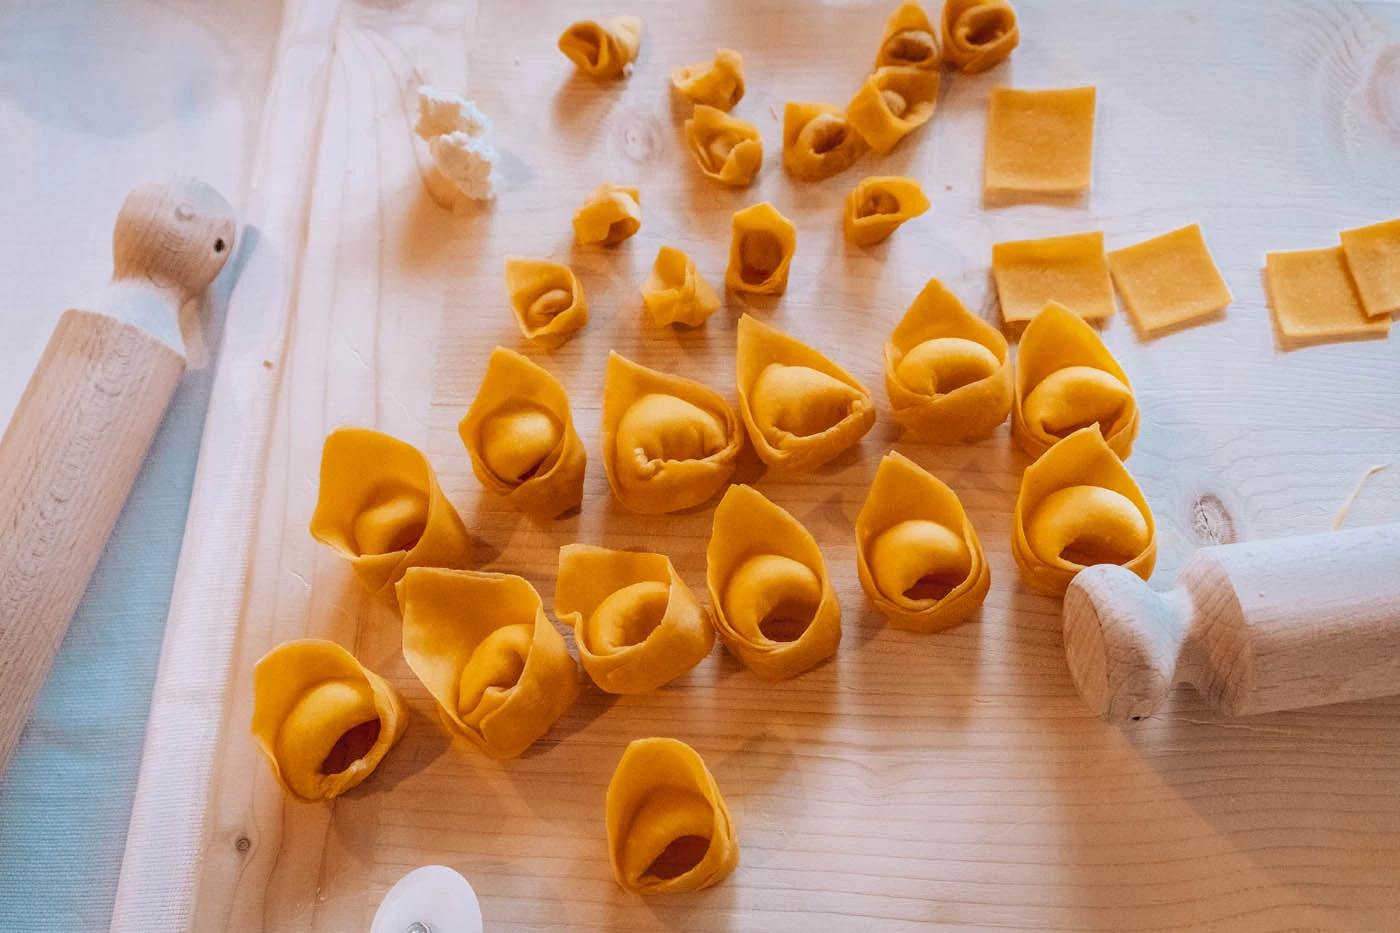 What to Eat in Bologna - Tortellini making workshop